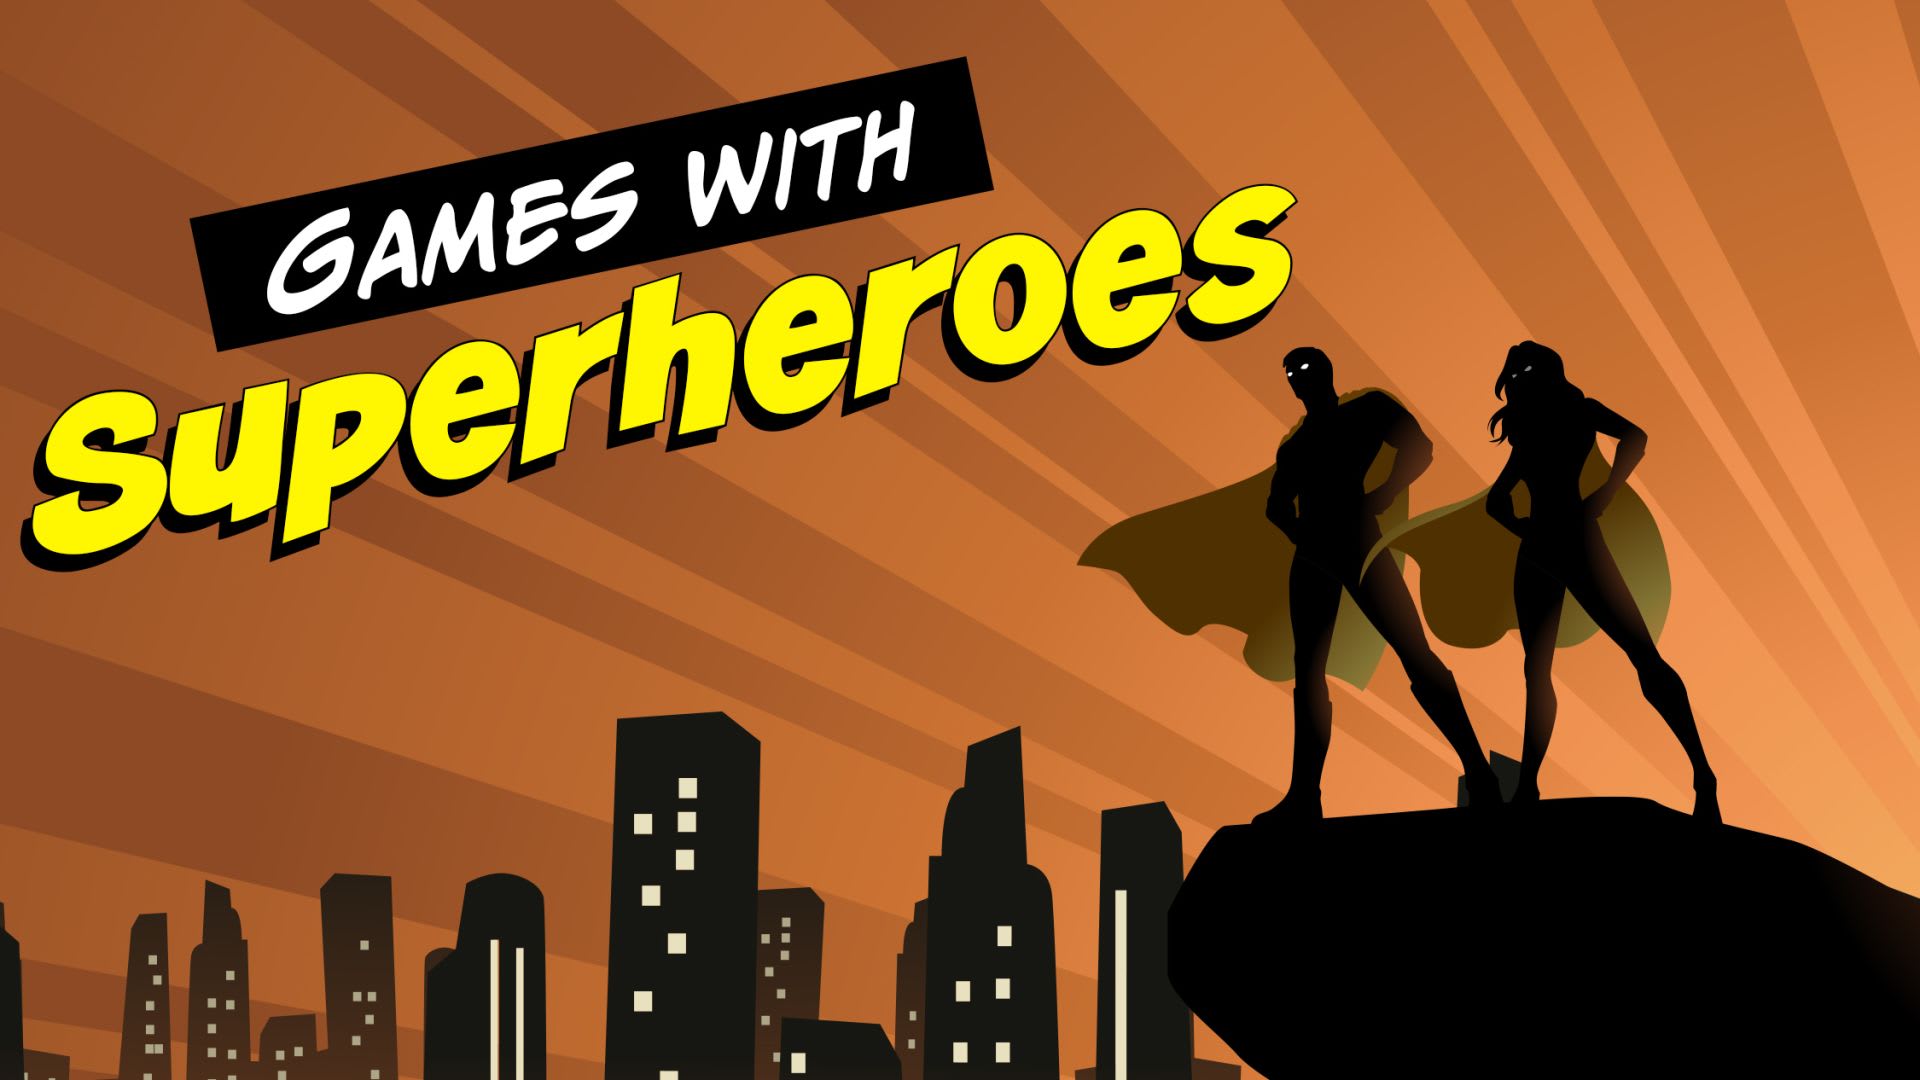 From universes to multiverses, these super people are here to save the day Hero